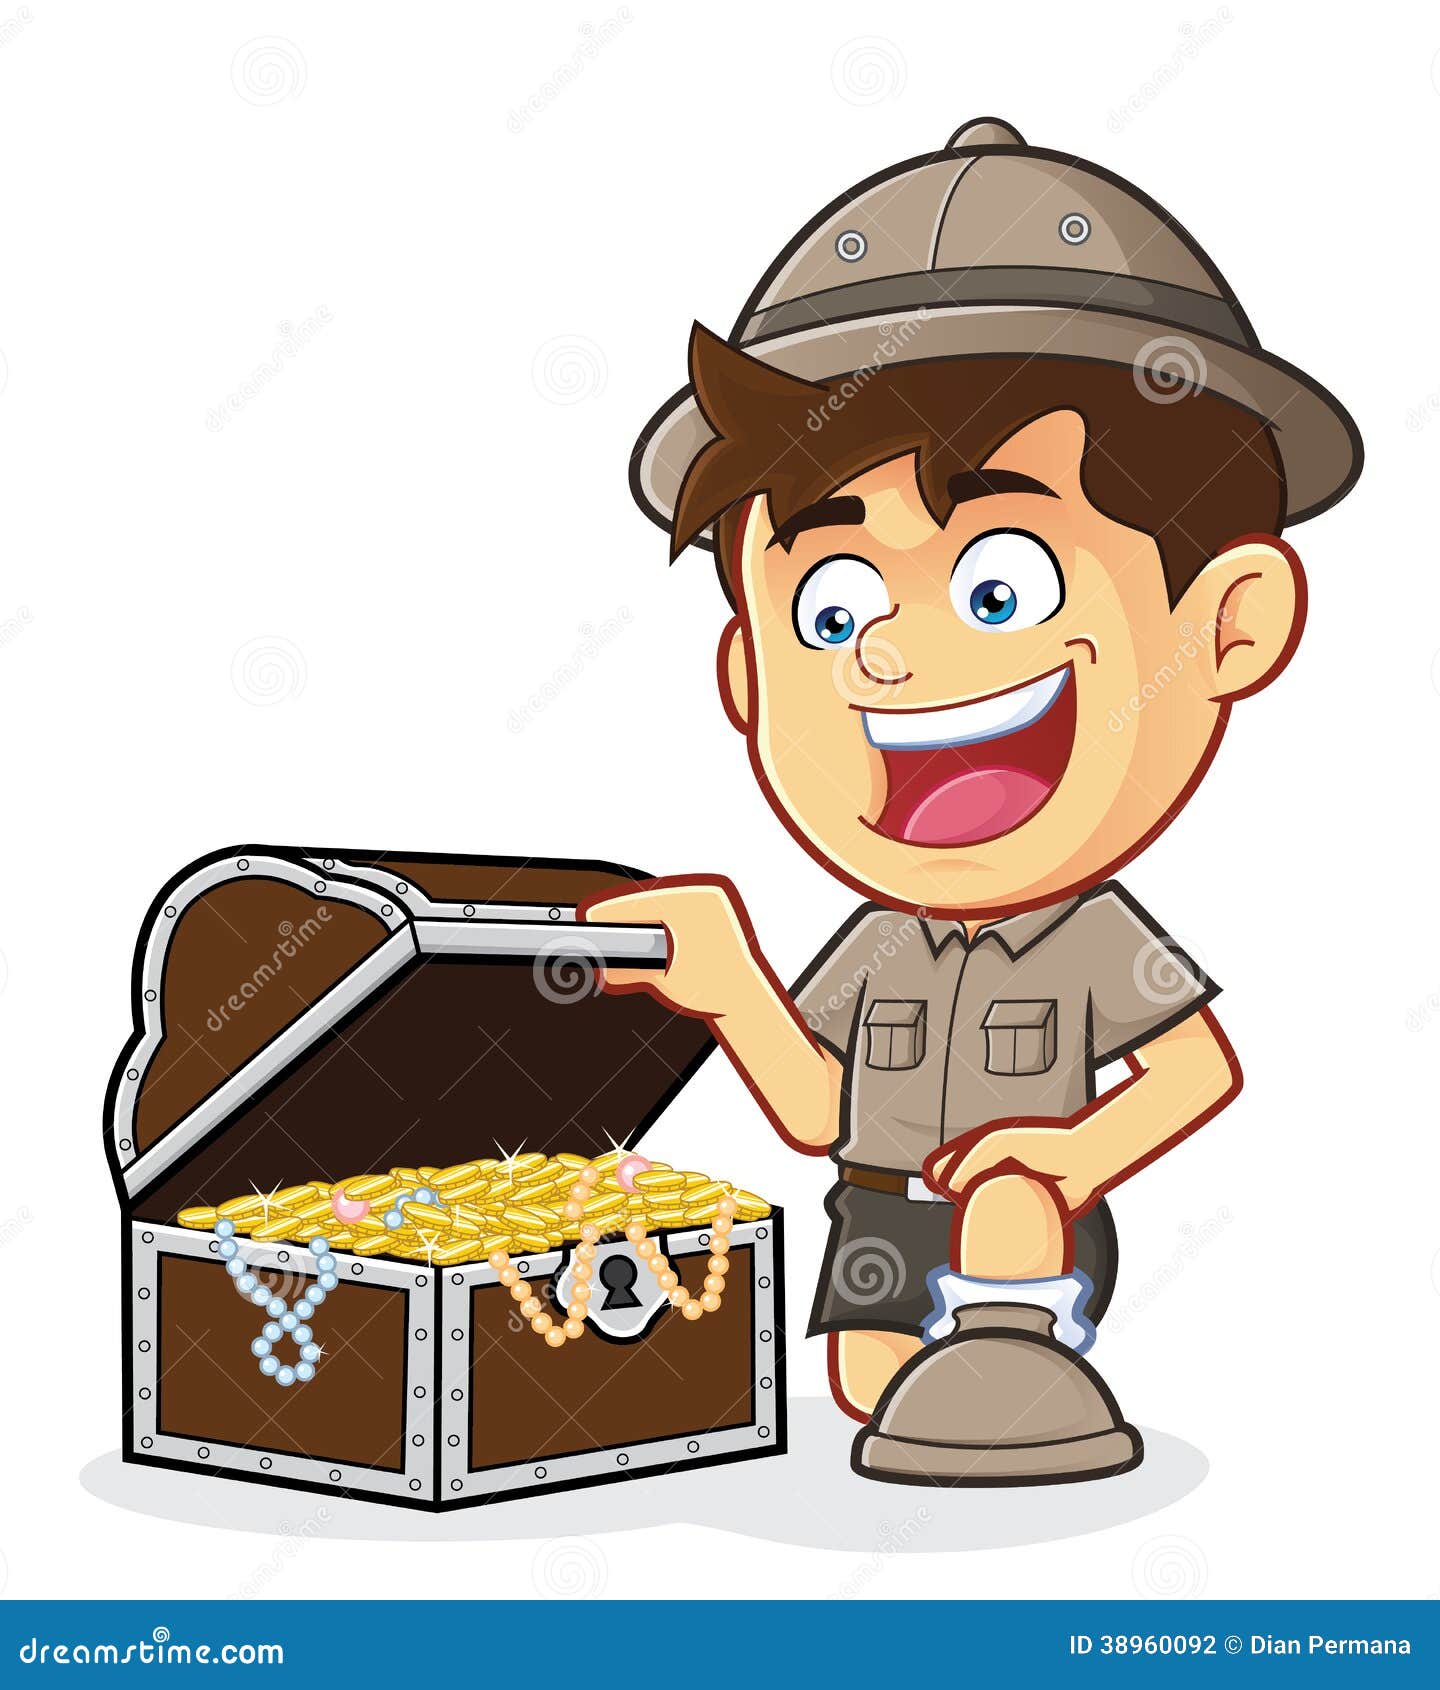 Boy Scout Or Explorer Boy With A Treasure Chest Stock Vector - Image